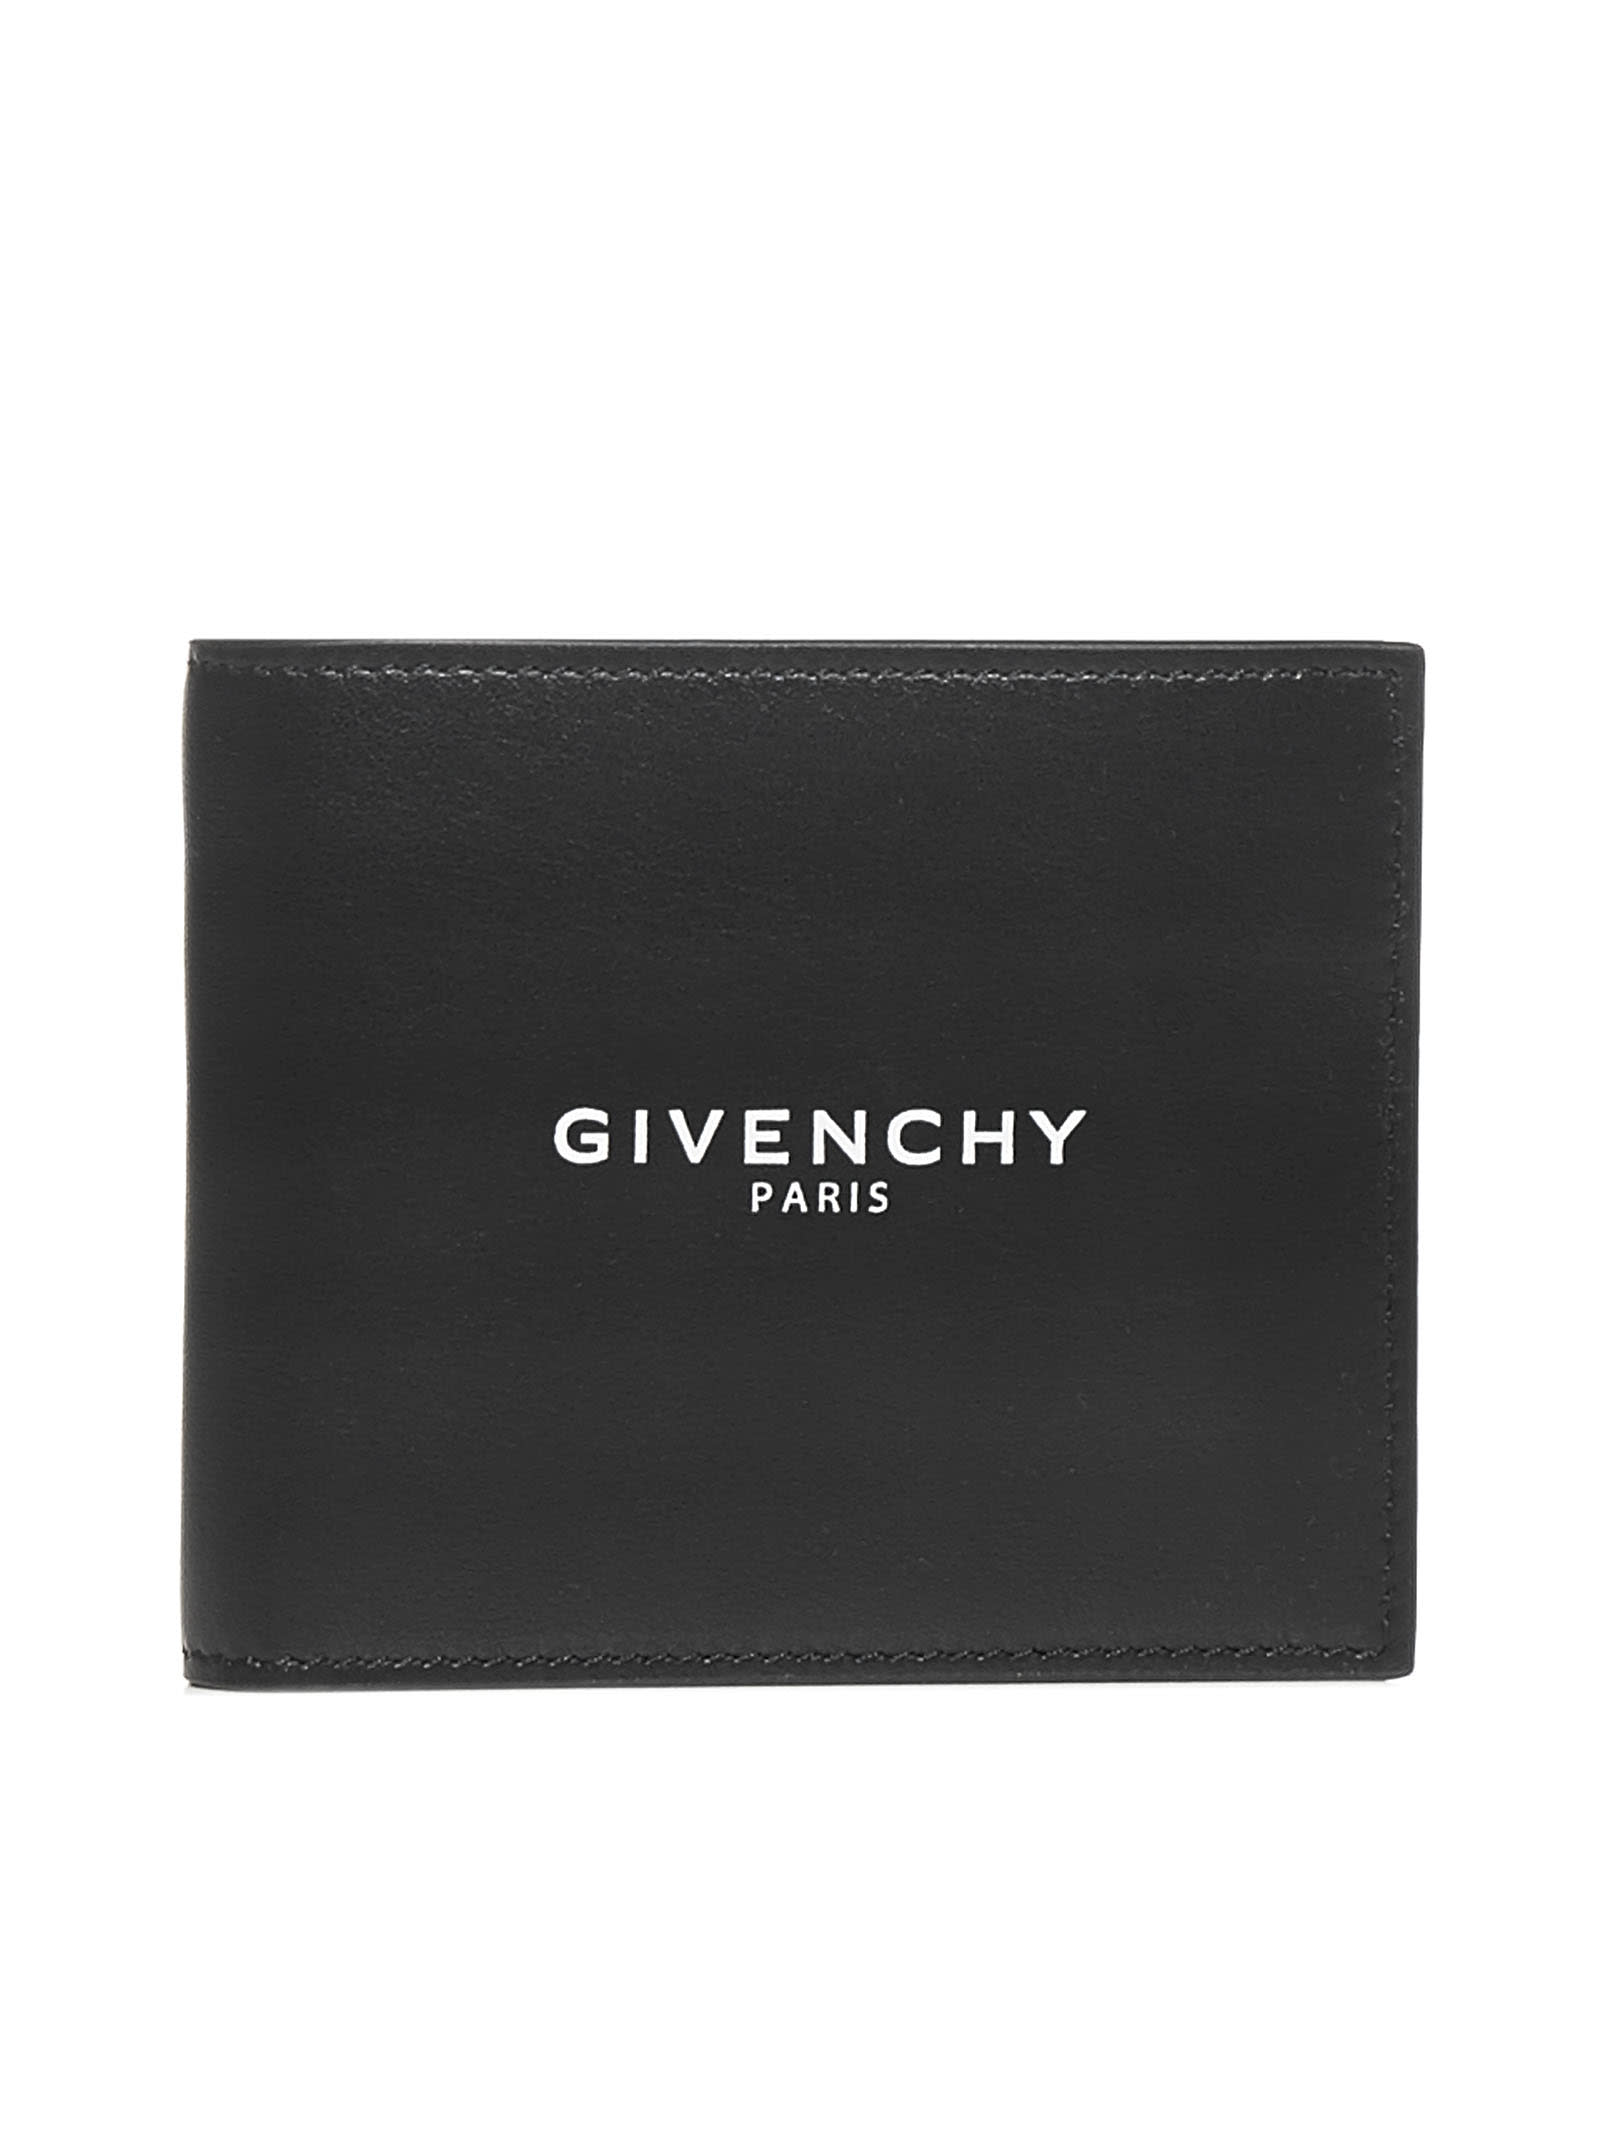 Givenchy Logo Leather Bifold Wallet